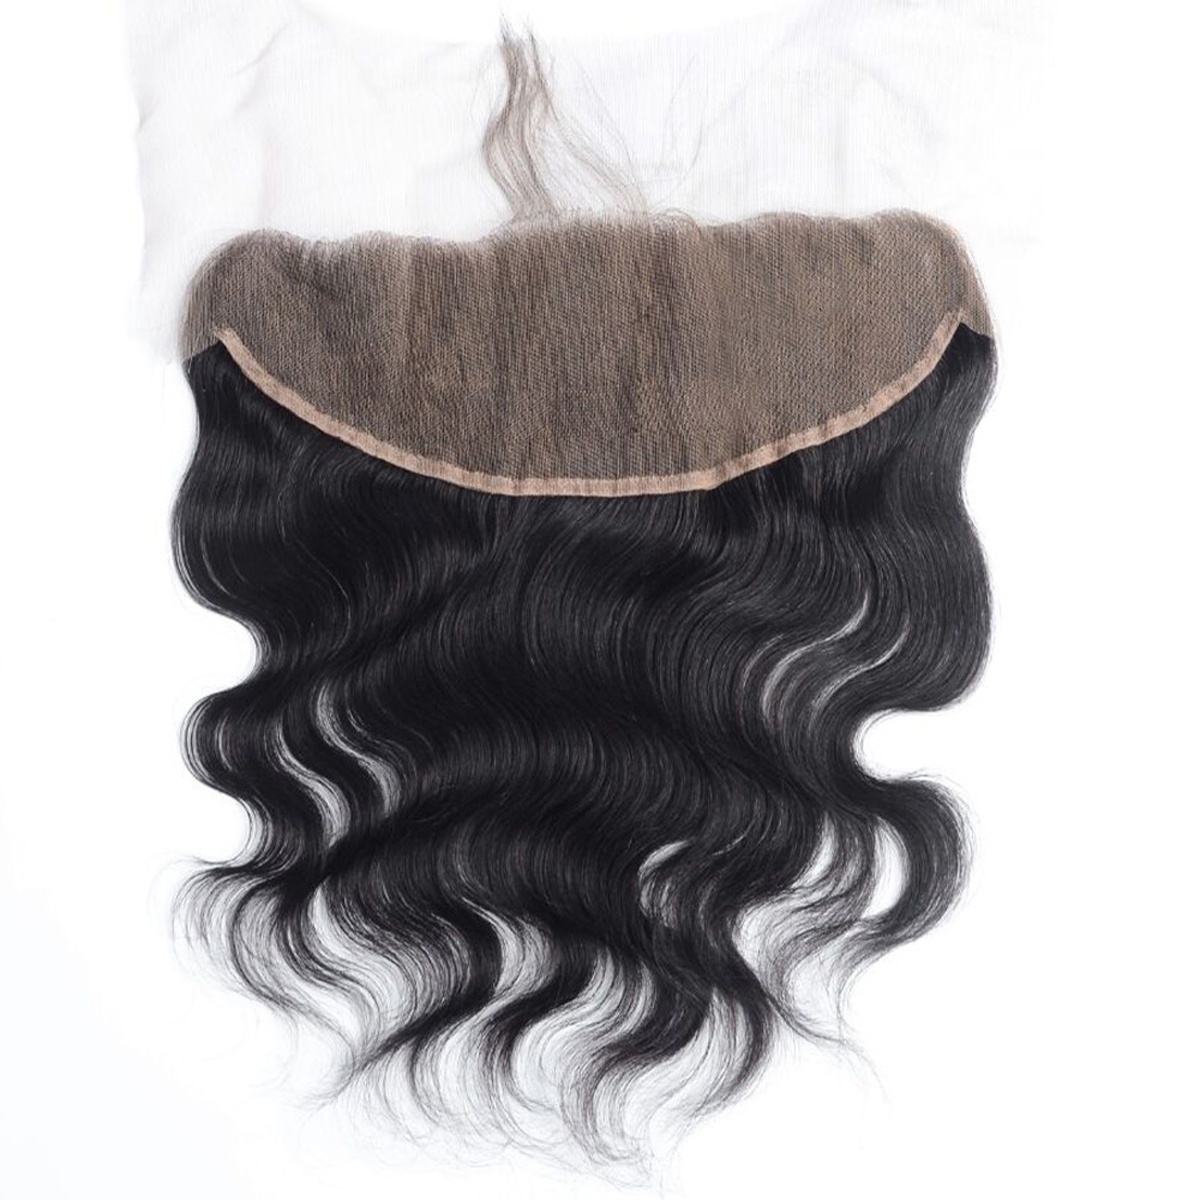 16″ Human Hair Lace Frontal For Black Women Body Wave 13X4 Lace Frontal